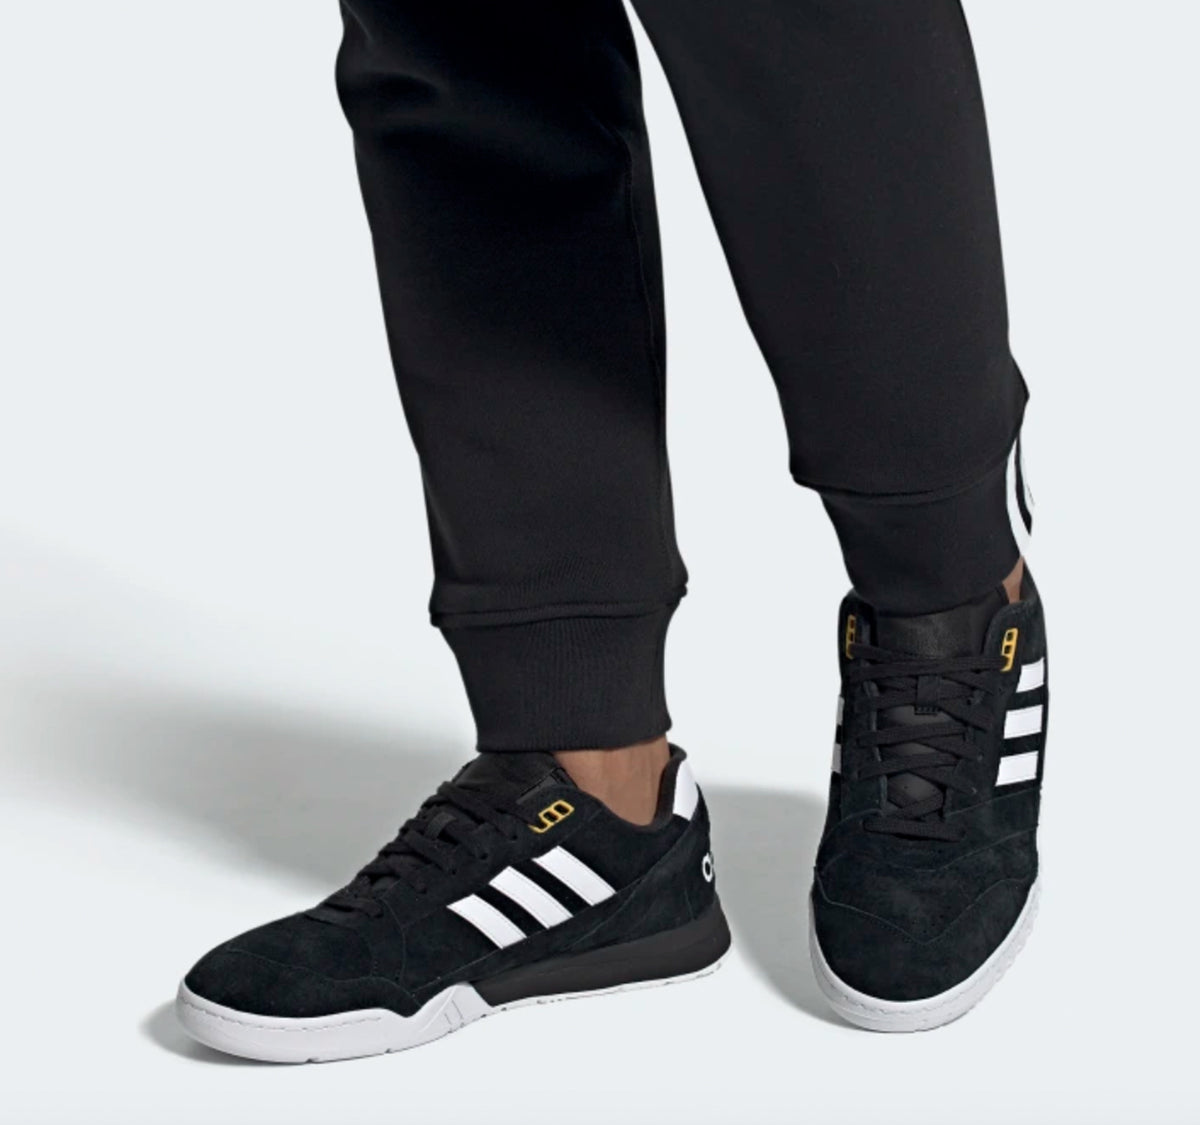 Adidas A.R. Trainer Men's Sneaker– On 